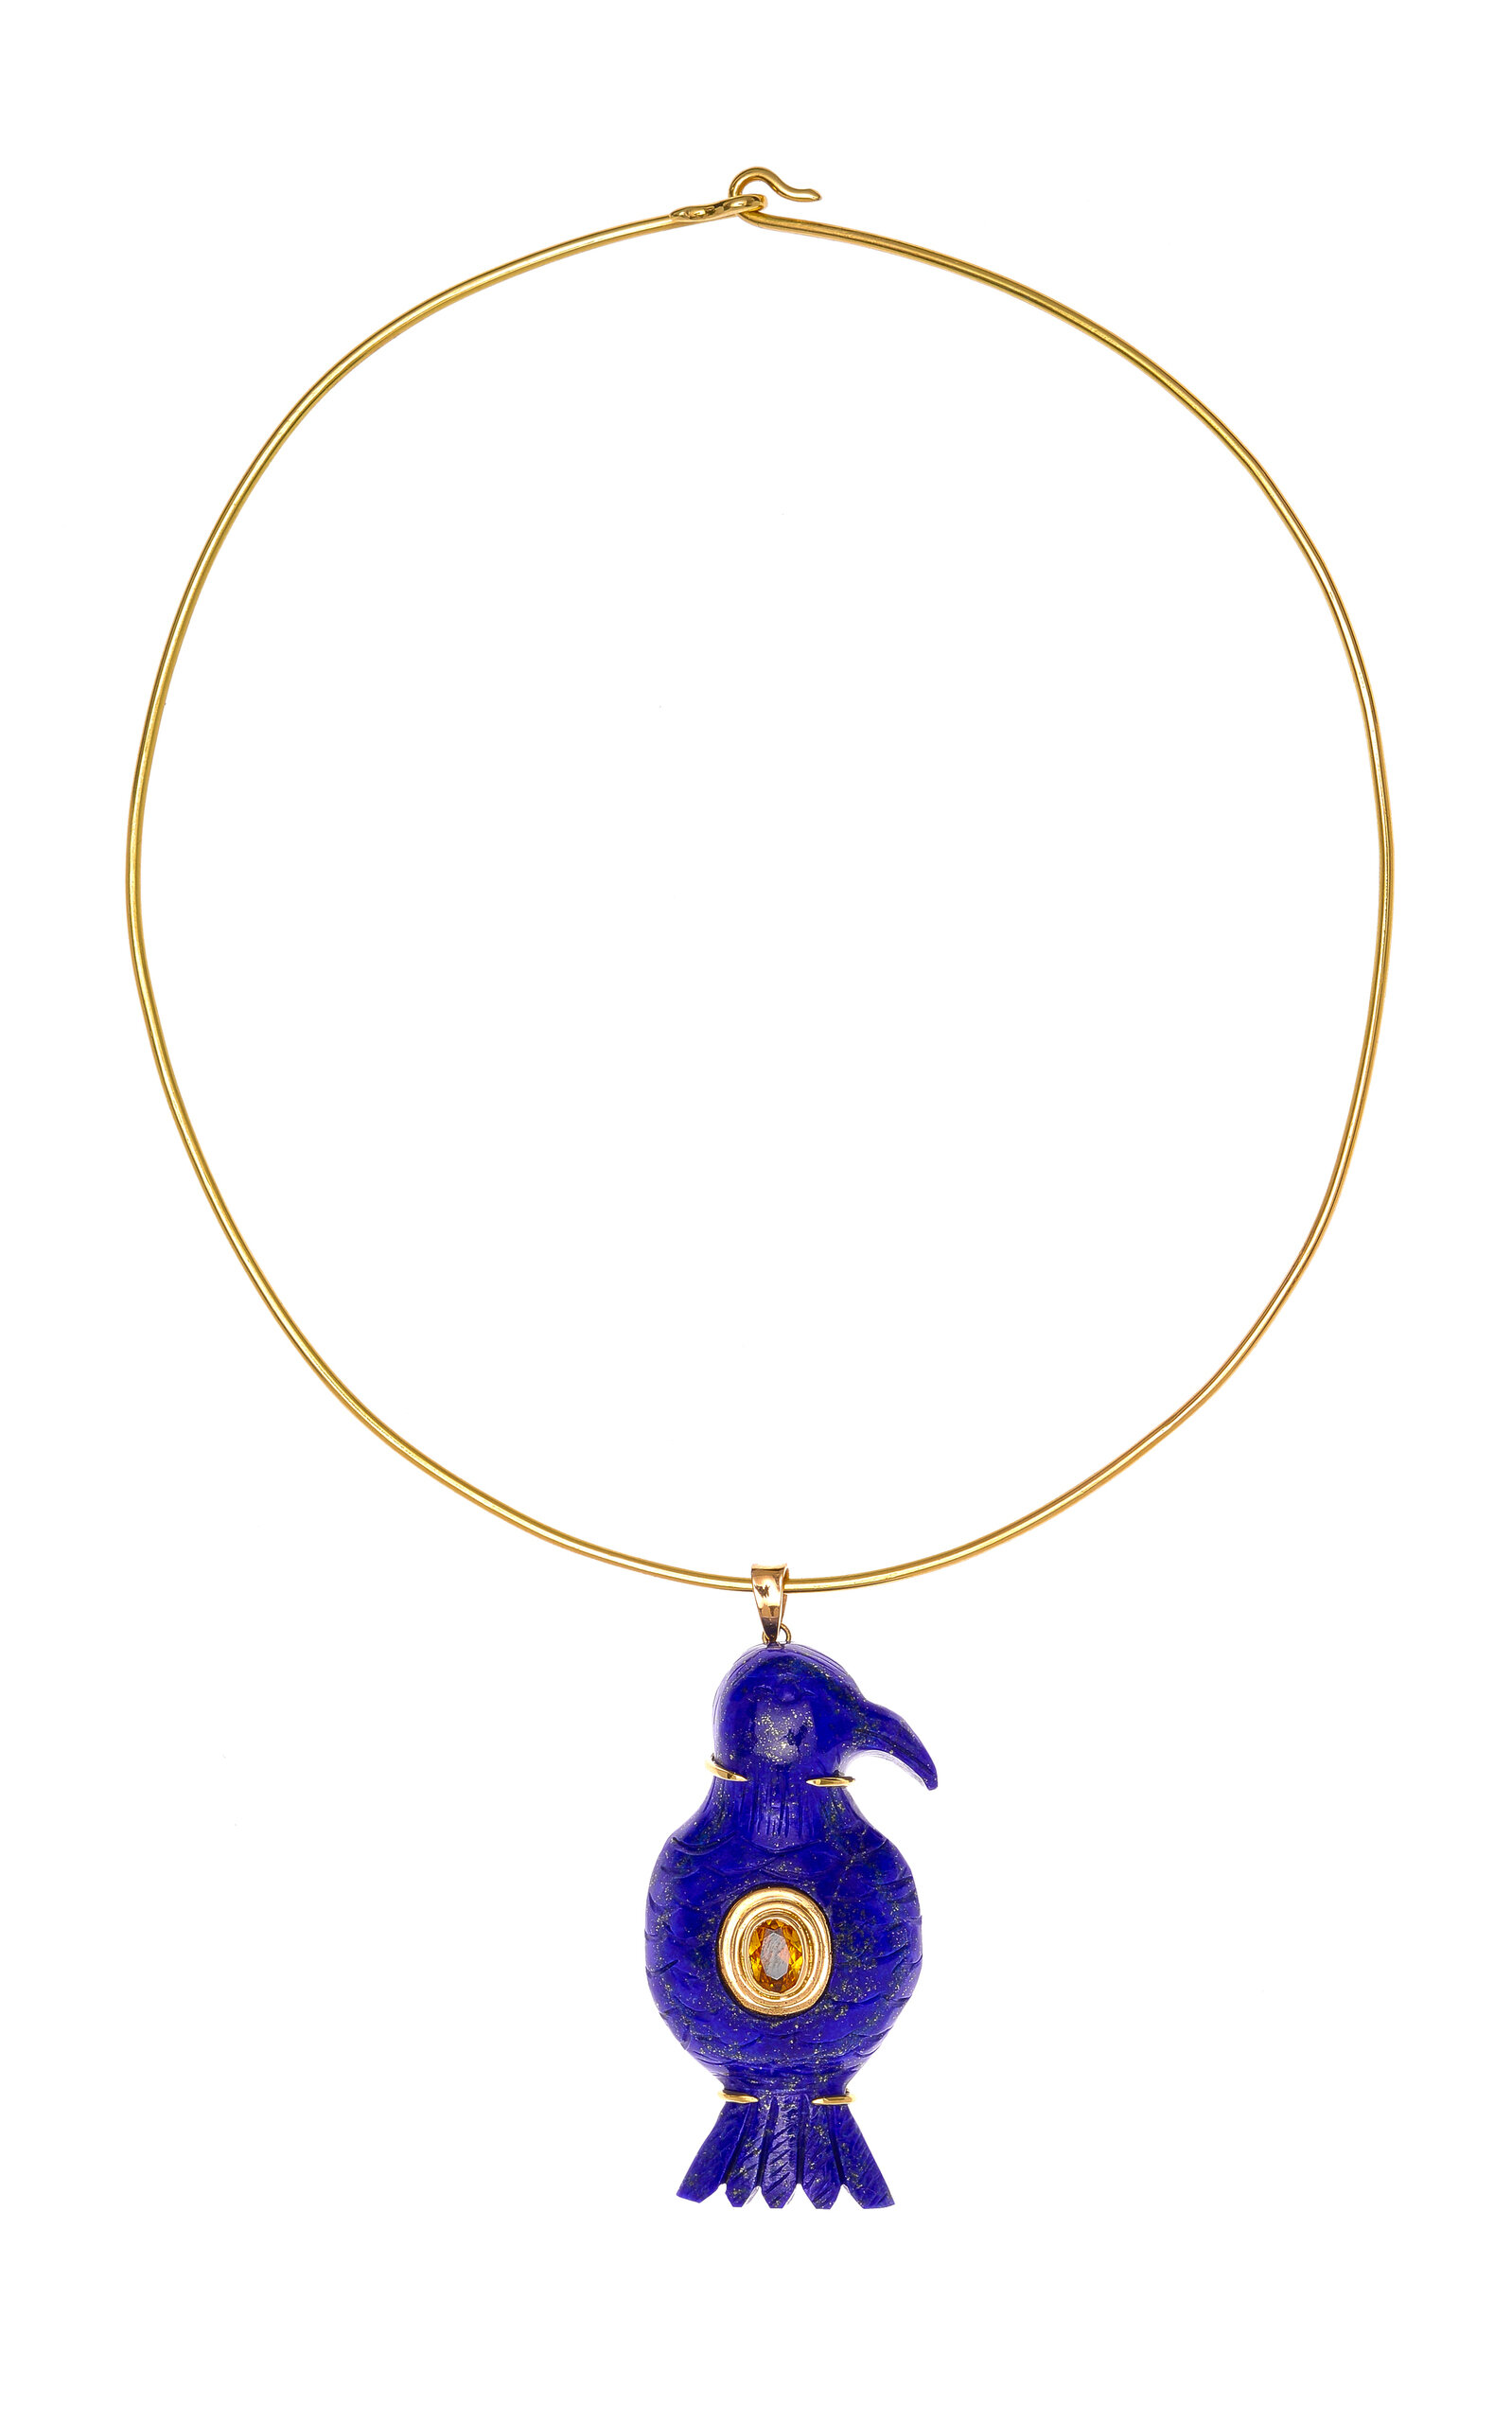 Haute Victoire Women's 18k Yellow Gold; Citrine; And Lapis Lazuli Necklace In Blue